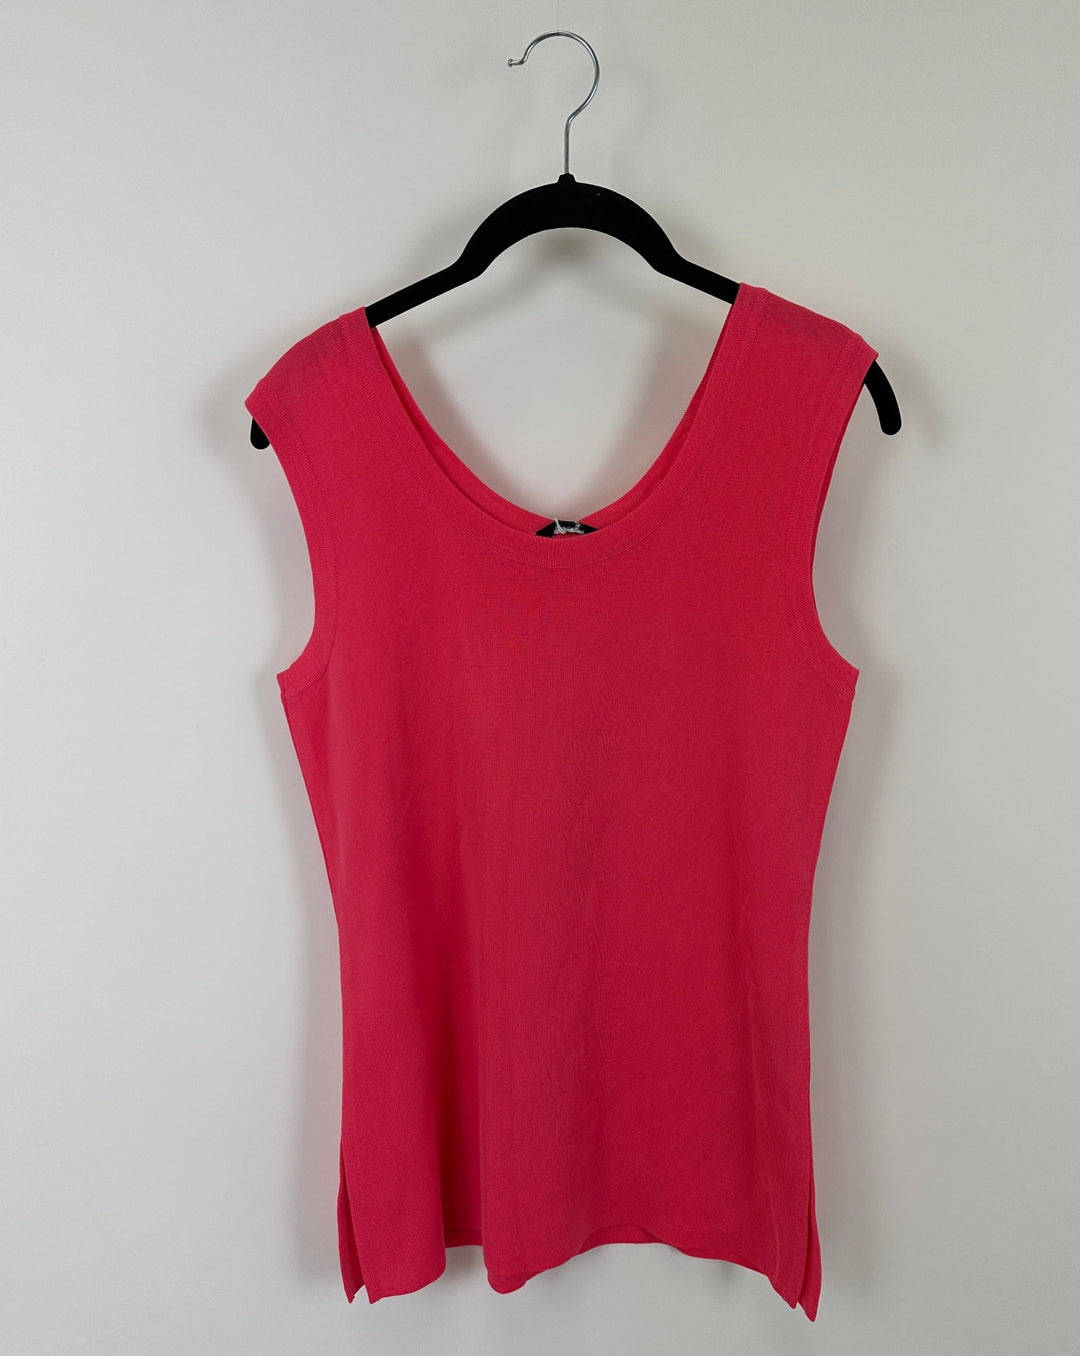 Bright Pink Knit Tank Top - Size 2/4 and 14/16